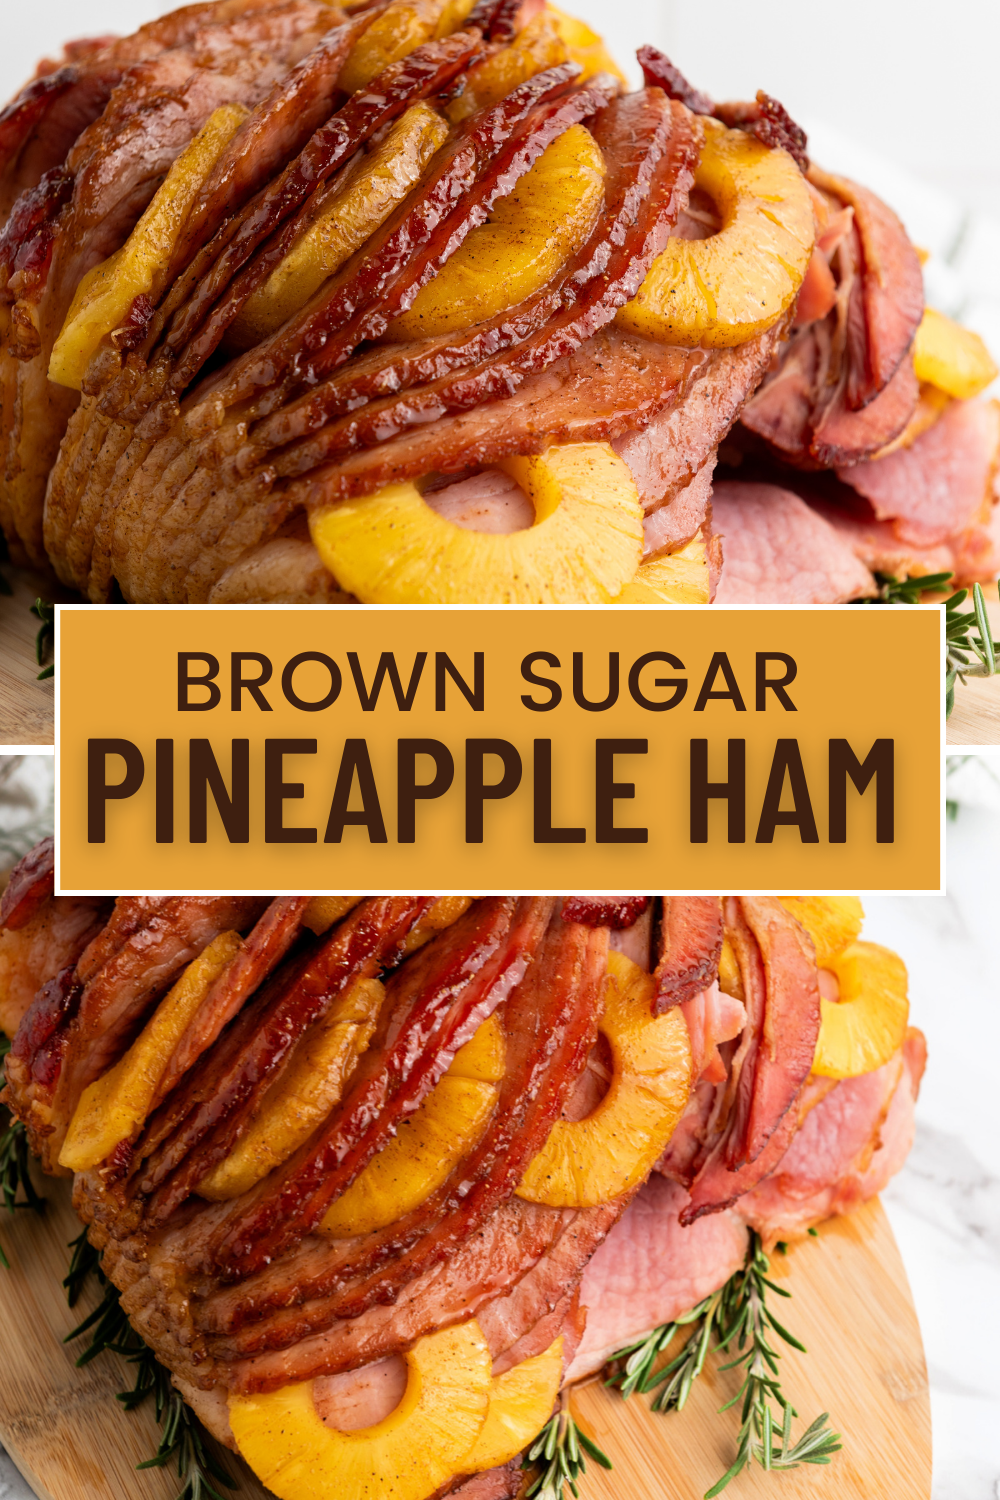 This Brown Sugar and Pineapple Ham requires 3 ingredients - it's the best way to serve up your holiday ham for family and friends and comes together in the oven or in the slow cooker!